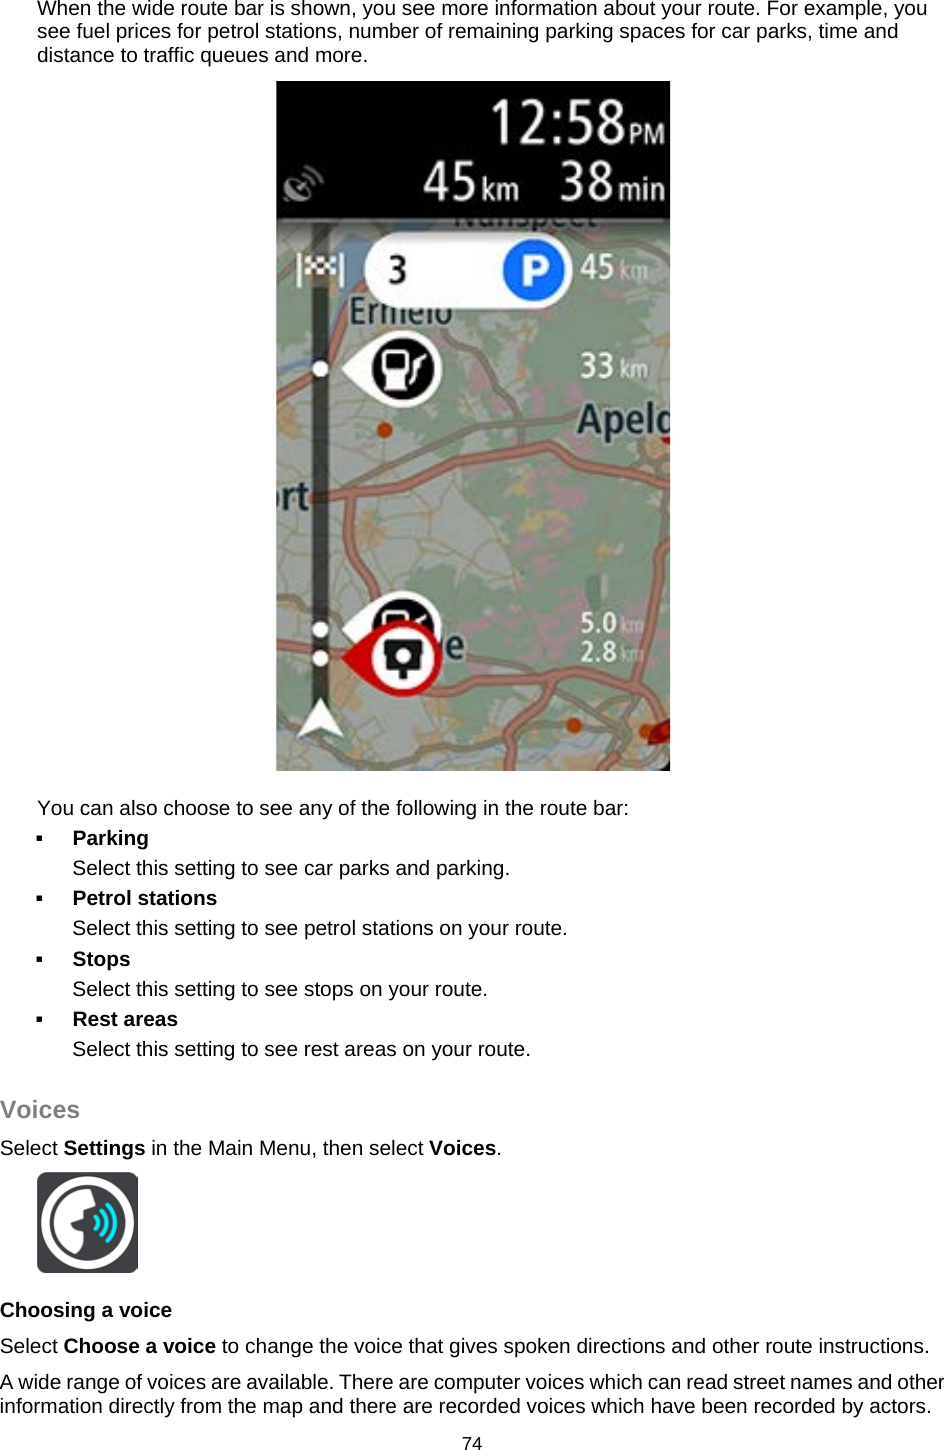  When the wide route bar is shown, you see more information about your route. For example, you see fuel prices for petrol stations, number of remaining parking spaces for car parks, time and distance to traffic queues and more.   You can also choose to see any of the following in the route bar:   Parking Select this setting to see car parks and parking.  Petrol stations Select this setting to see petrol stations on your route.  Stops Select this setting to see stops on your route.  Rest areas Select this setting to see rest areas on your route.  Voices Select Settings in the Main Menu, then select Voices.    Choosing a voice Select Choose a voice to change the voice that gives spoken directions and other route instructions. A wide range of voices are available. There are computer voices which can read street names and other information directly from the map and there are recorded voices which have been recorded by actors. 74   